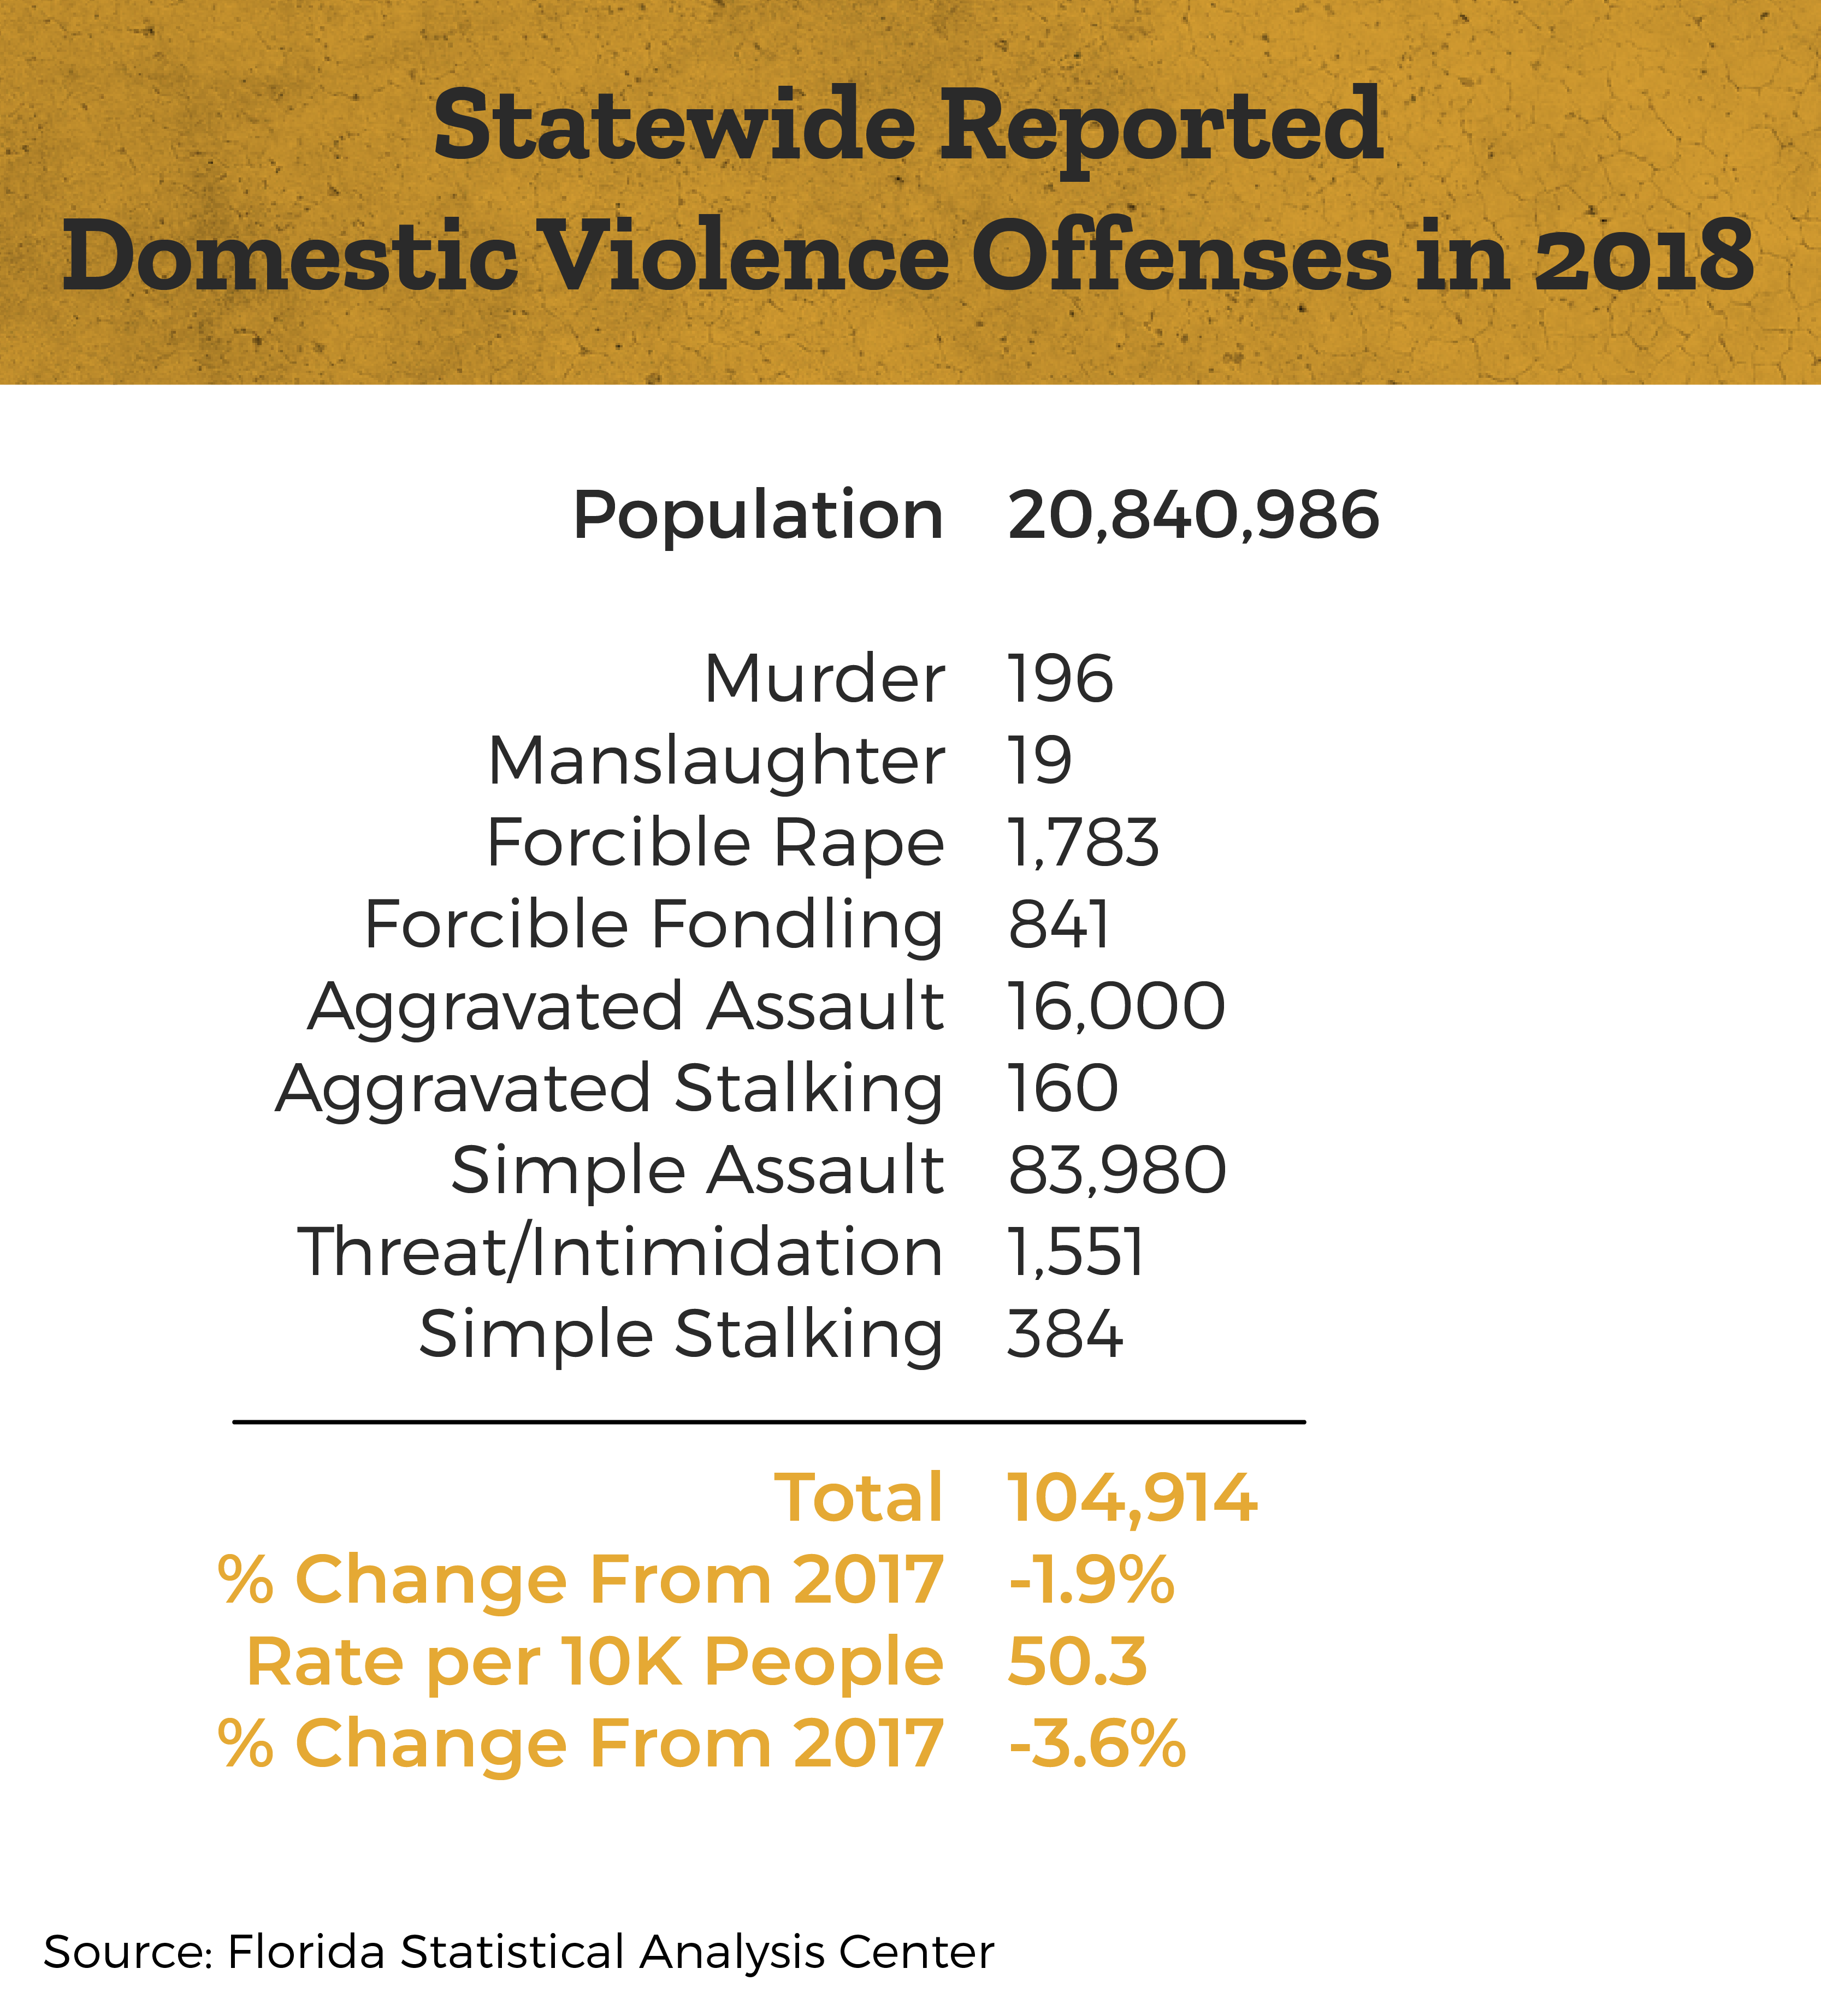 florida-statewide-reported-domestic-violence-offenses-2018